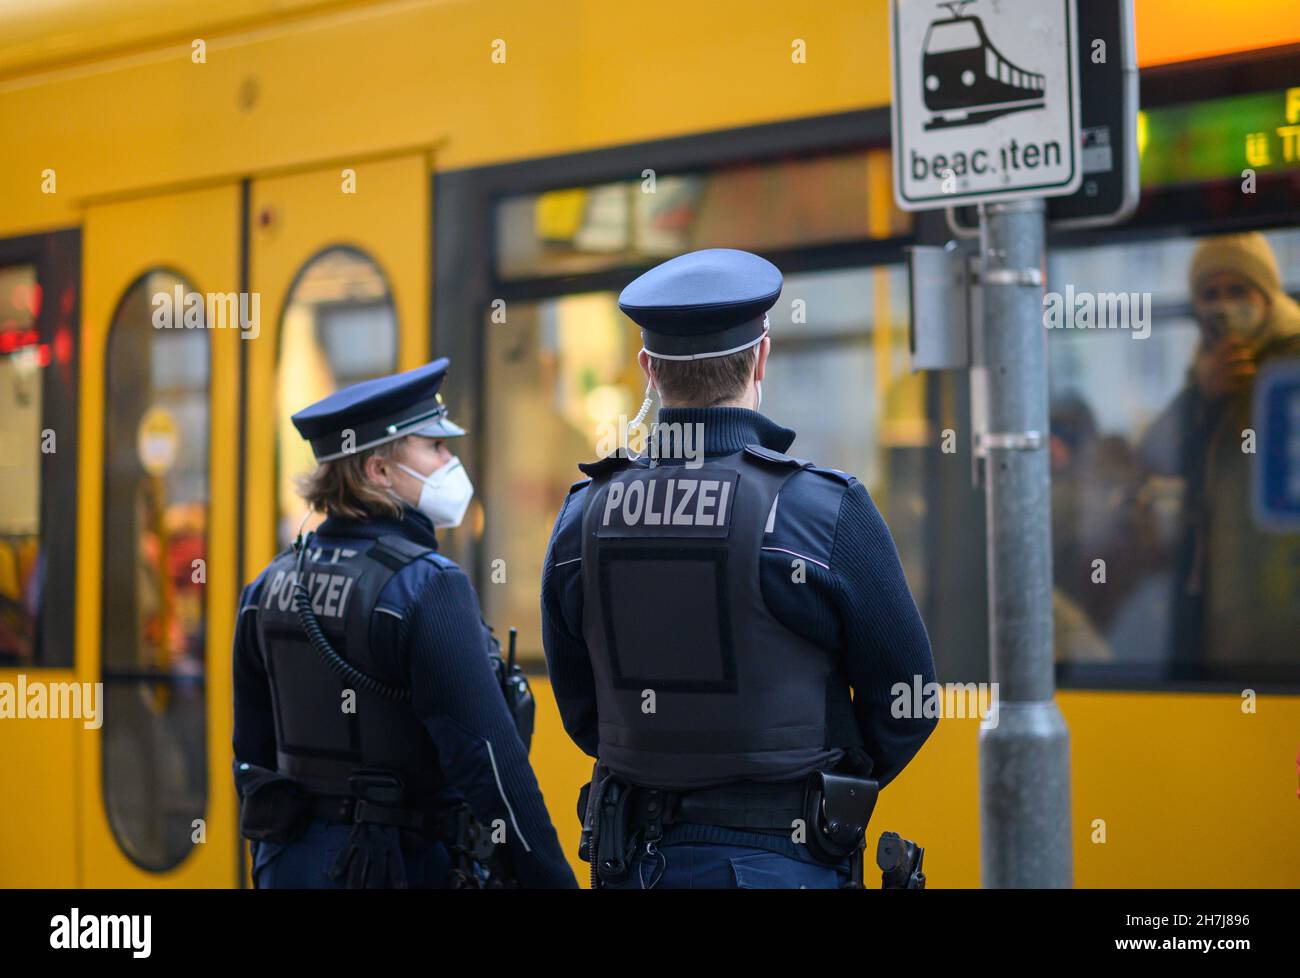 Dresden, Germany. 23rd Nov, 2021. Police officers stand at a DVB tram stop in Dresden city centre. The Dresden police department is monitoring compliance with the new Corona rules on a daily basis with 50 officers. Accordingly, the focus is on controls of the FFP2 mask obligation in public transport as well as the exit restrictions for unvaccinated persons in hotspot areas. Credit: Robert Michael/dpa-Zentralbild/dpa/Alamy Live News Stock Photo